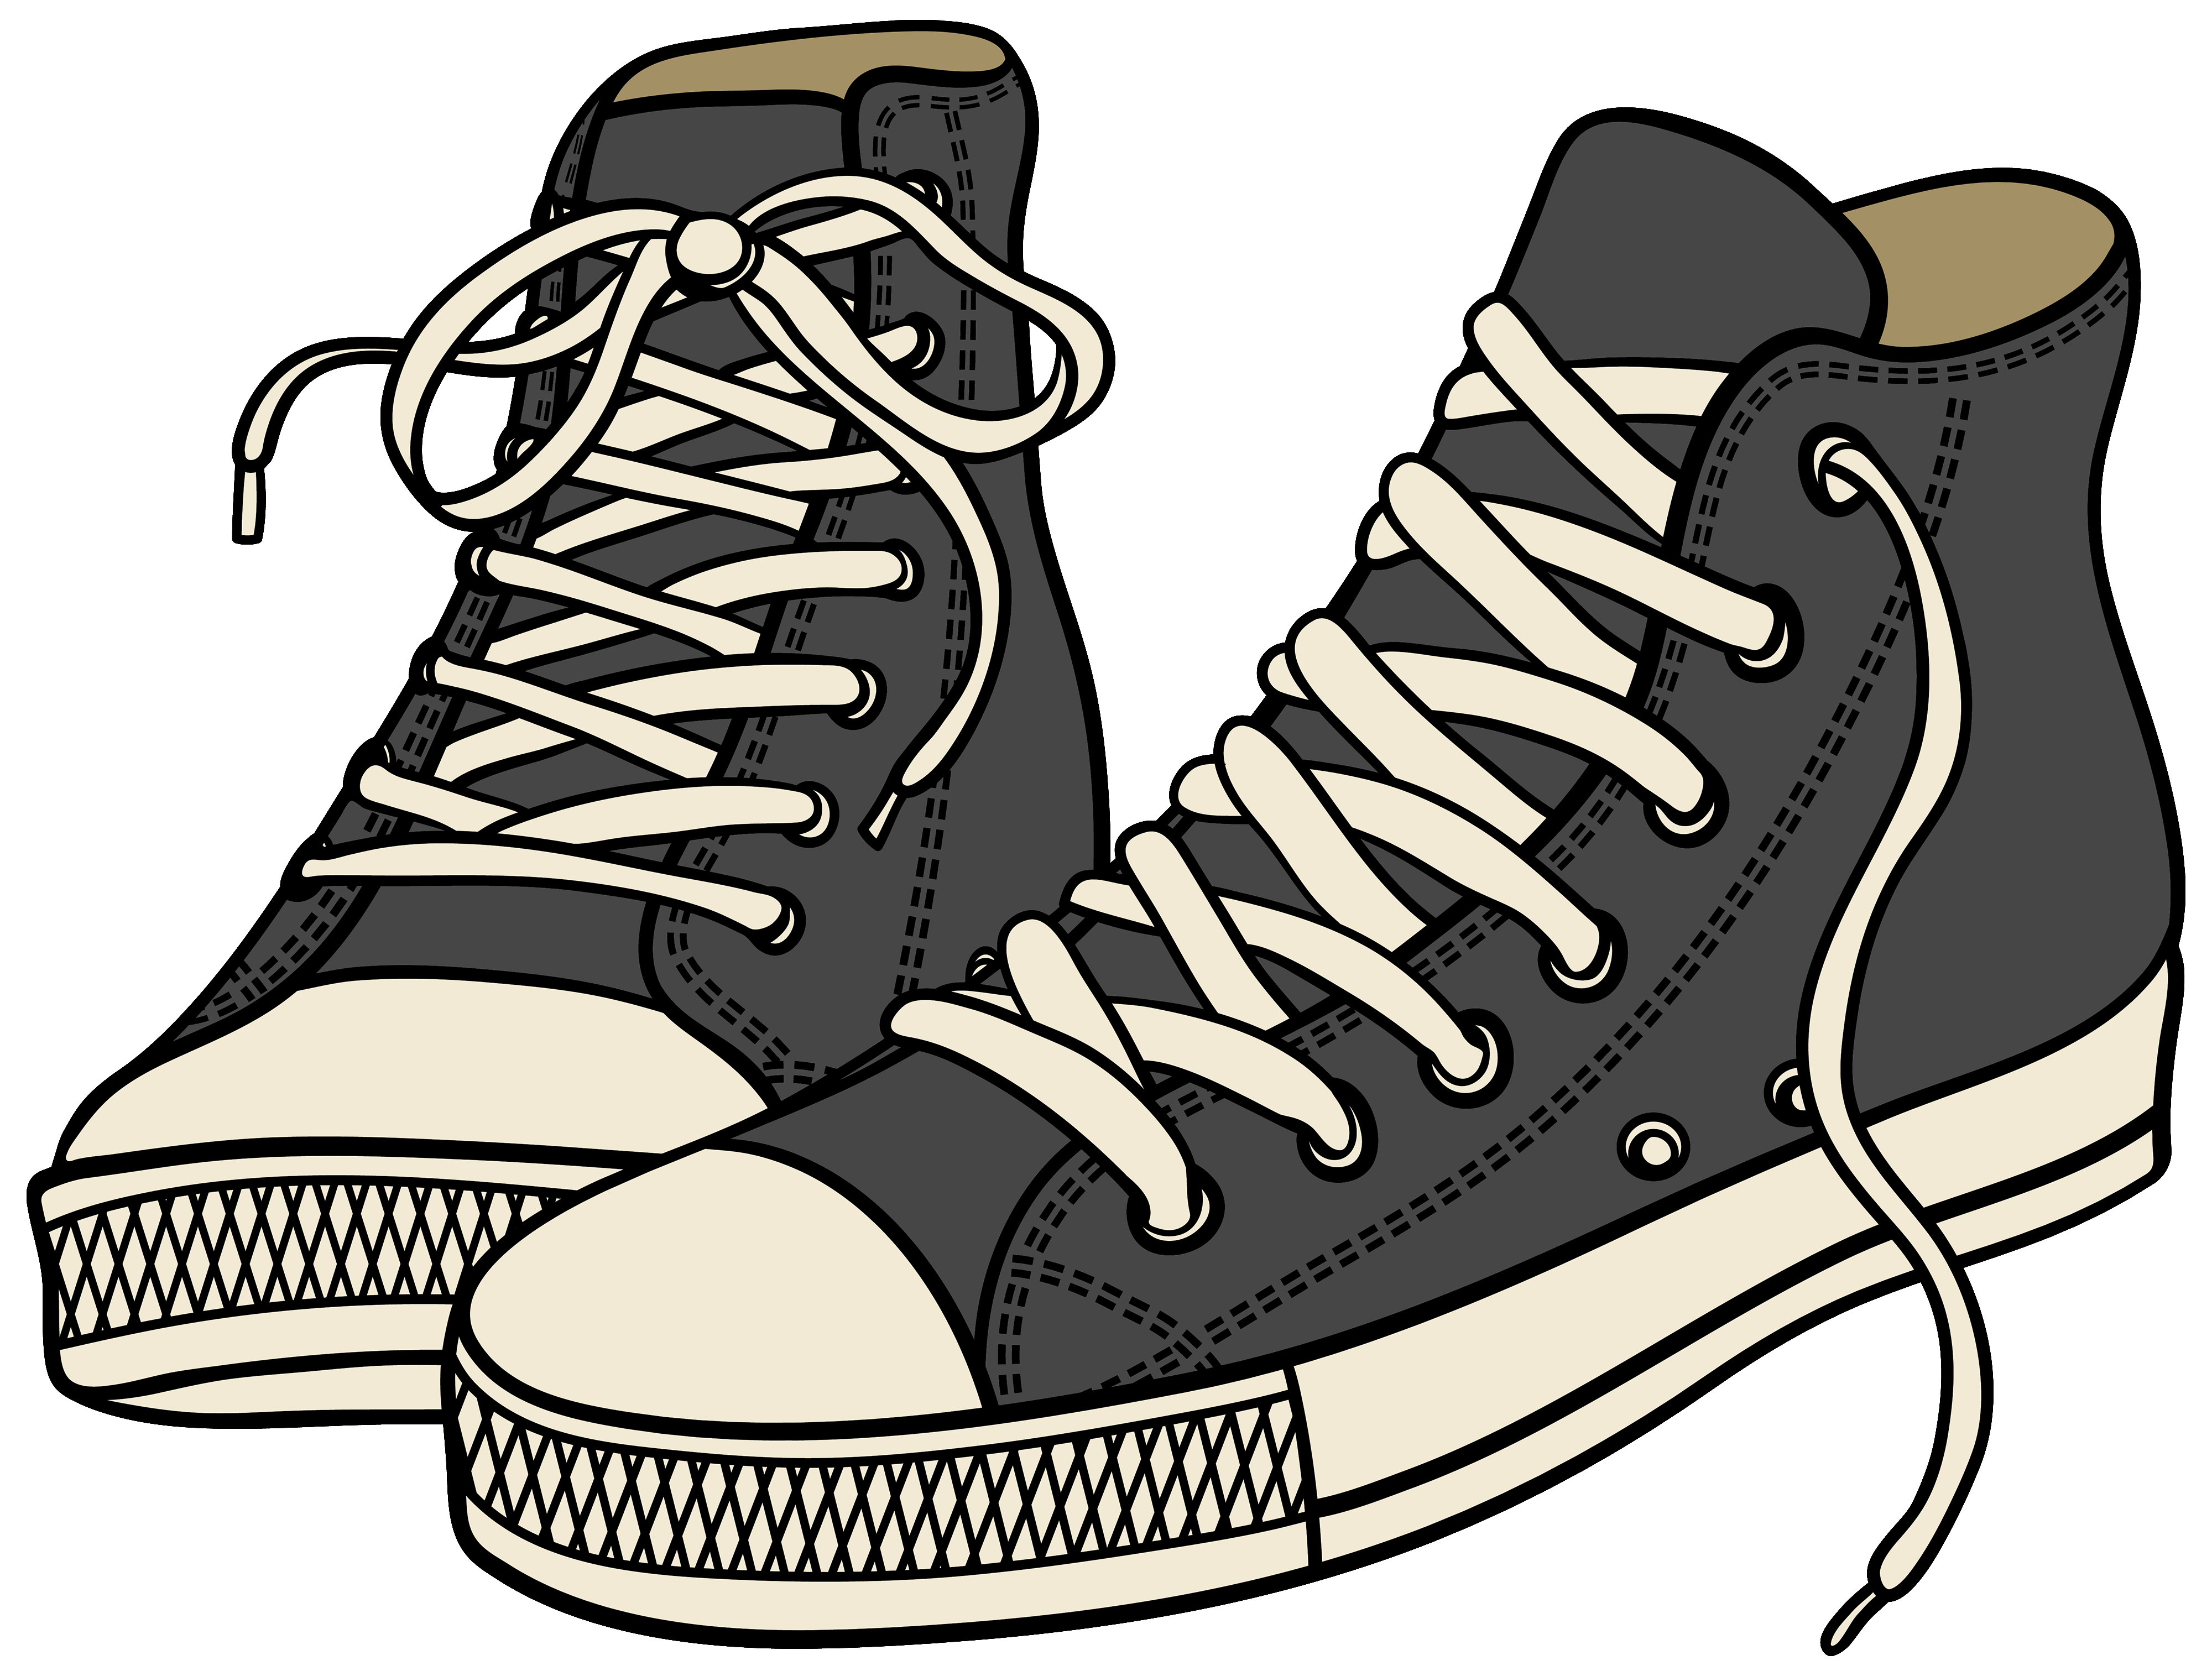 Free Shoes Clipart Png, Download Free Shoes Clipart Png png images